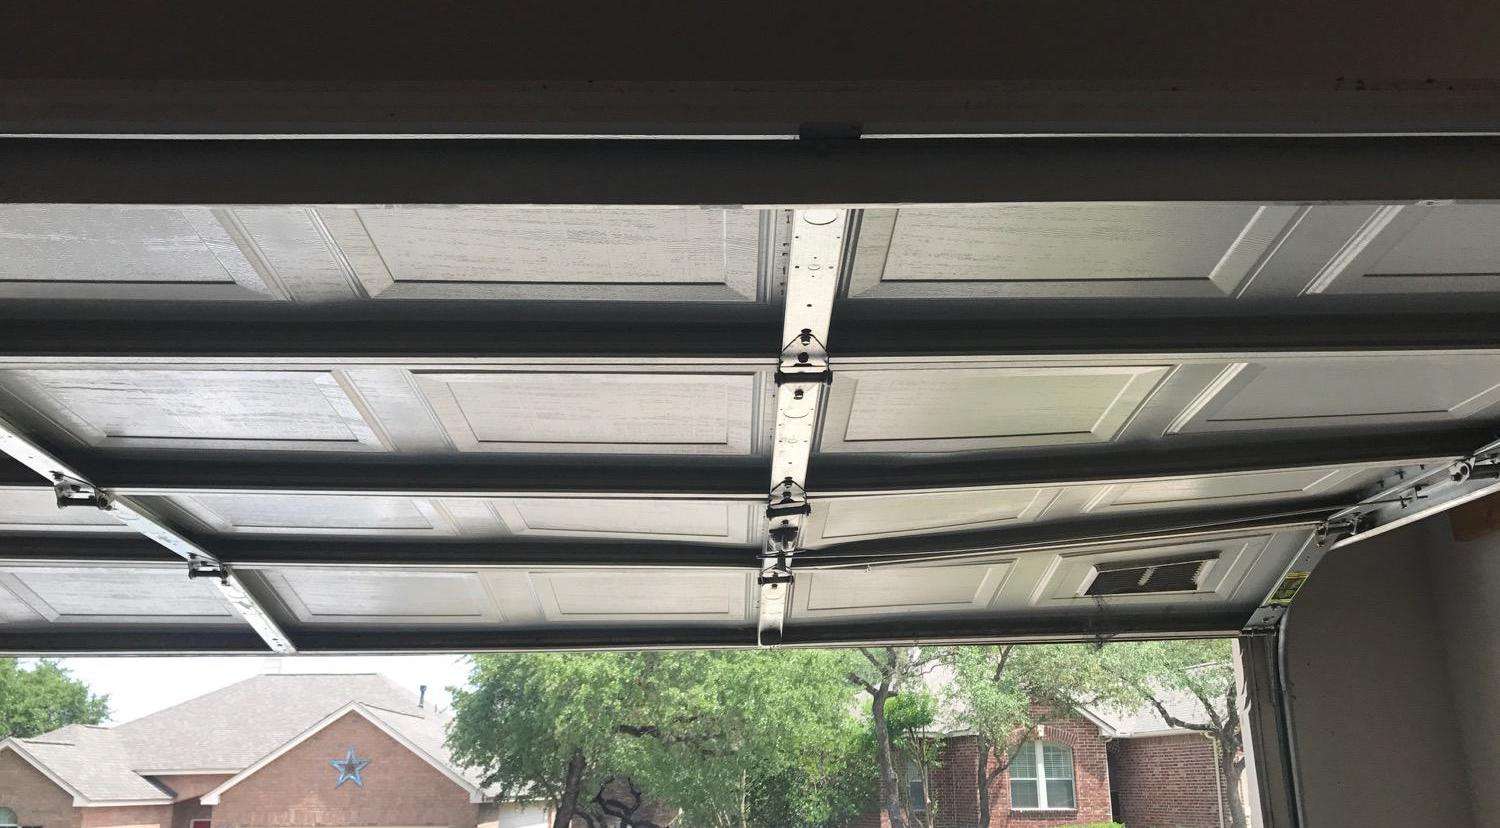 The bottom and second sections are sagging on this garage door.